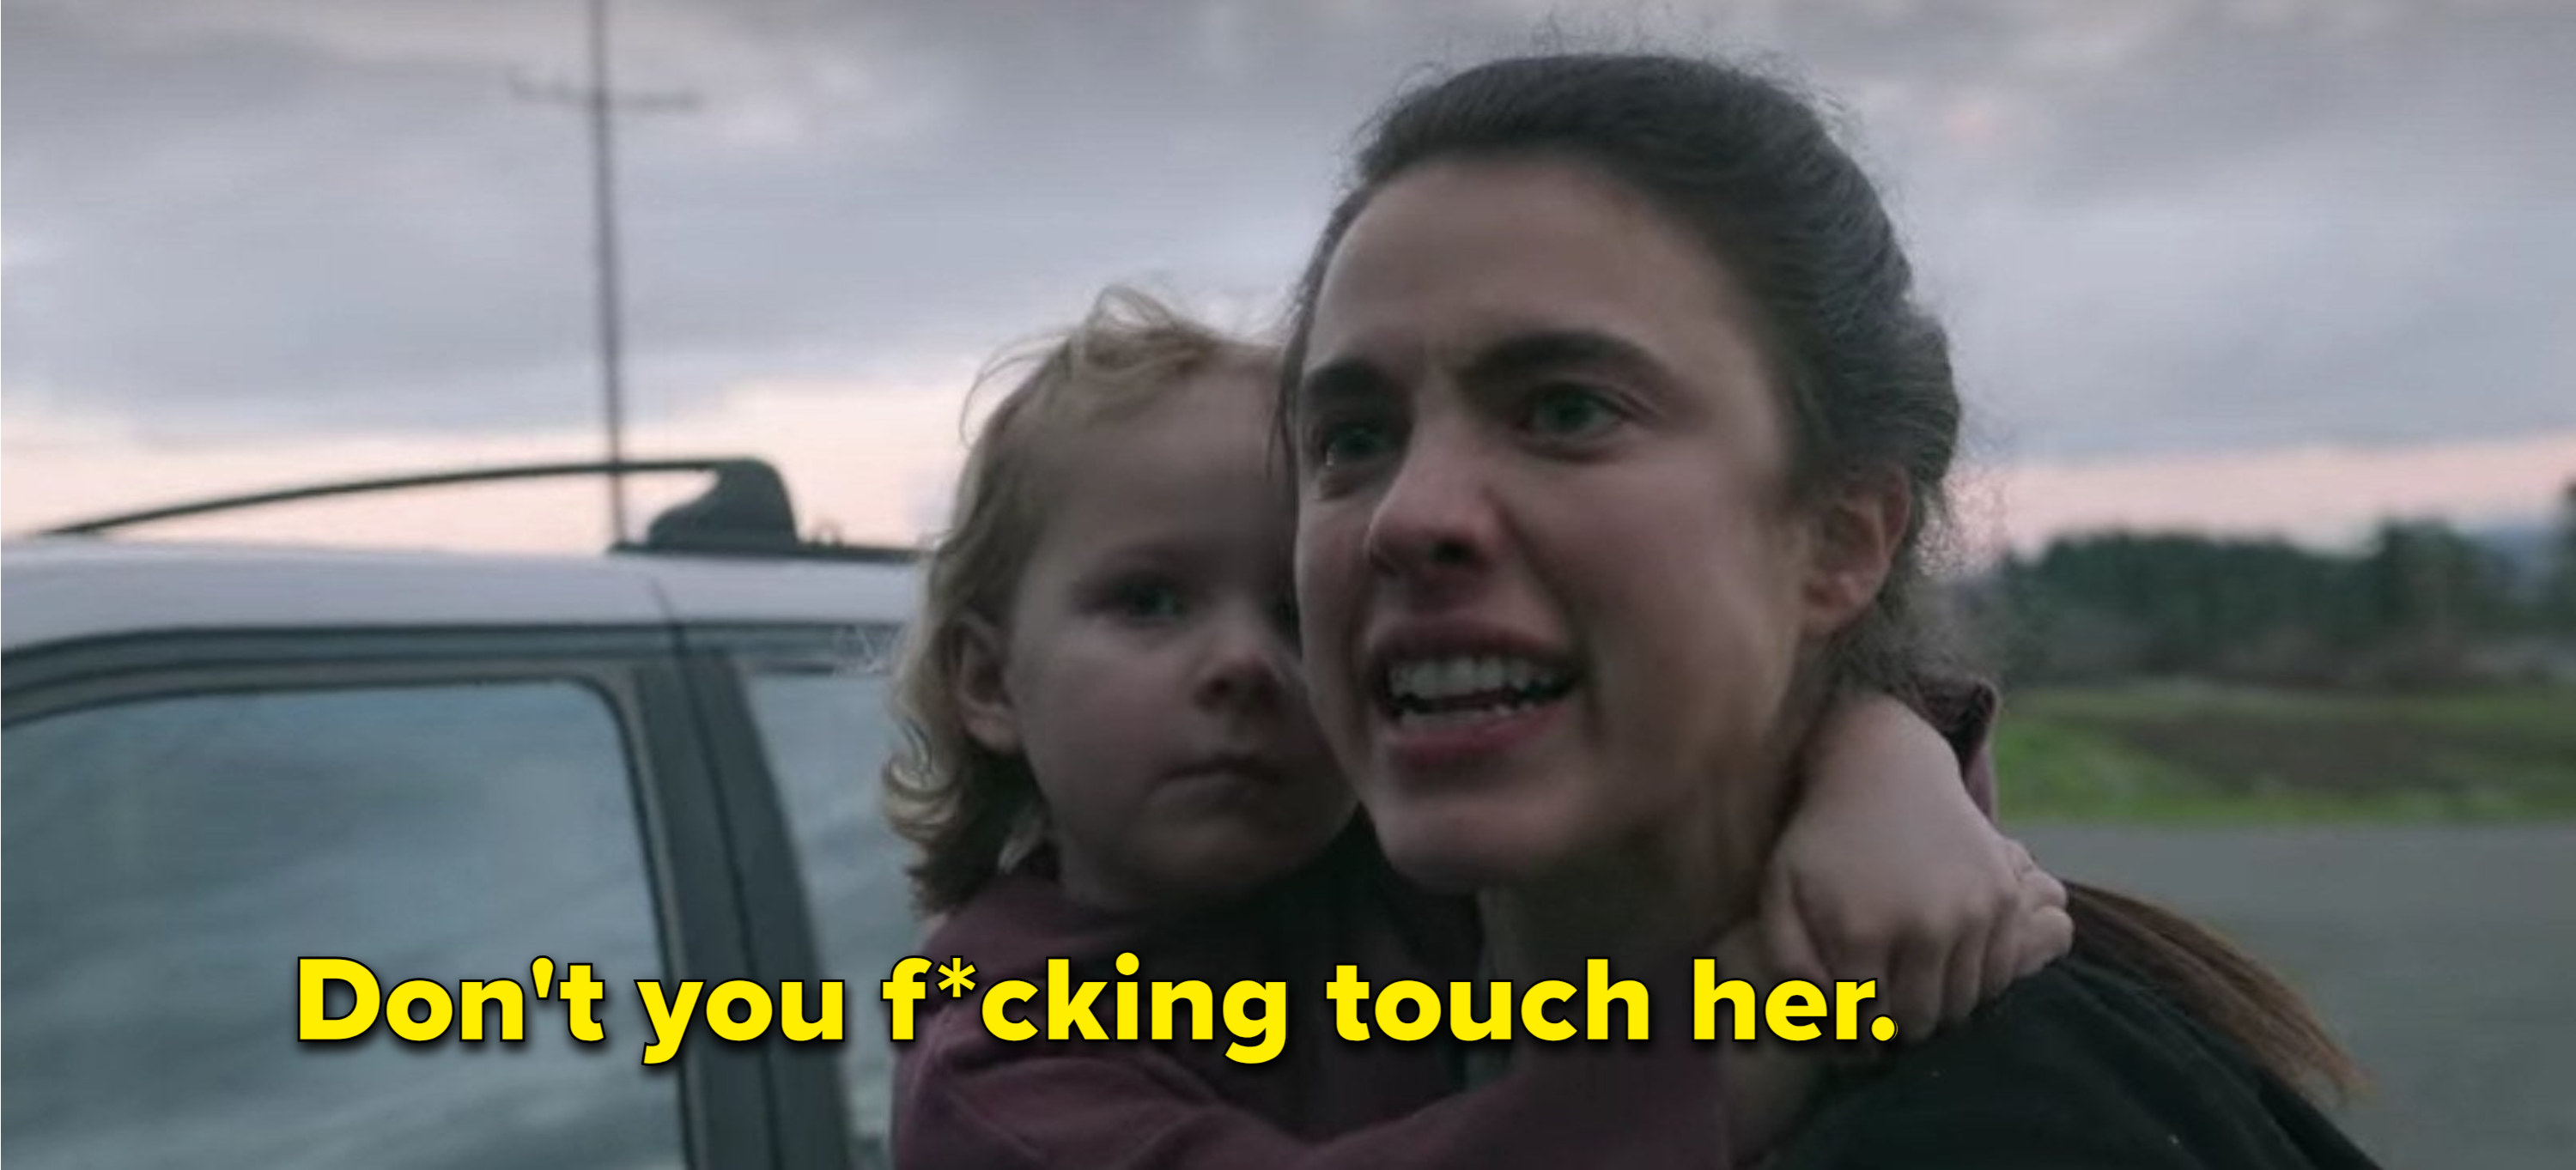 Alex tells her father not to touch her daughter